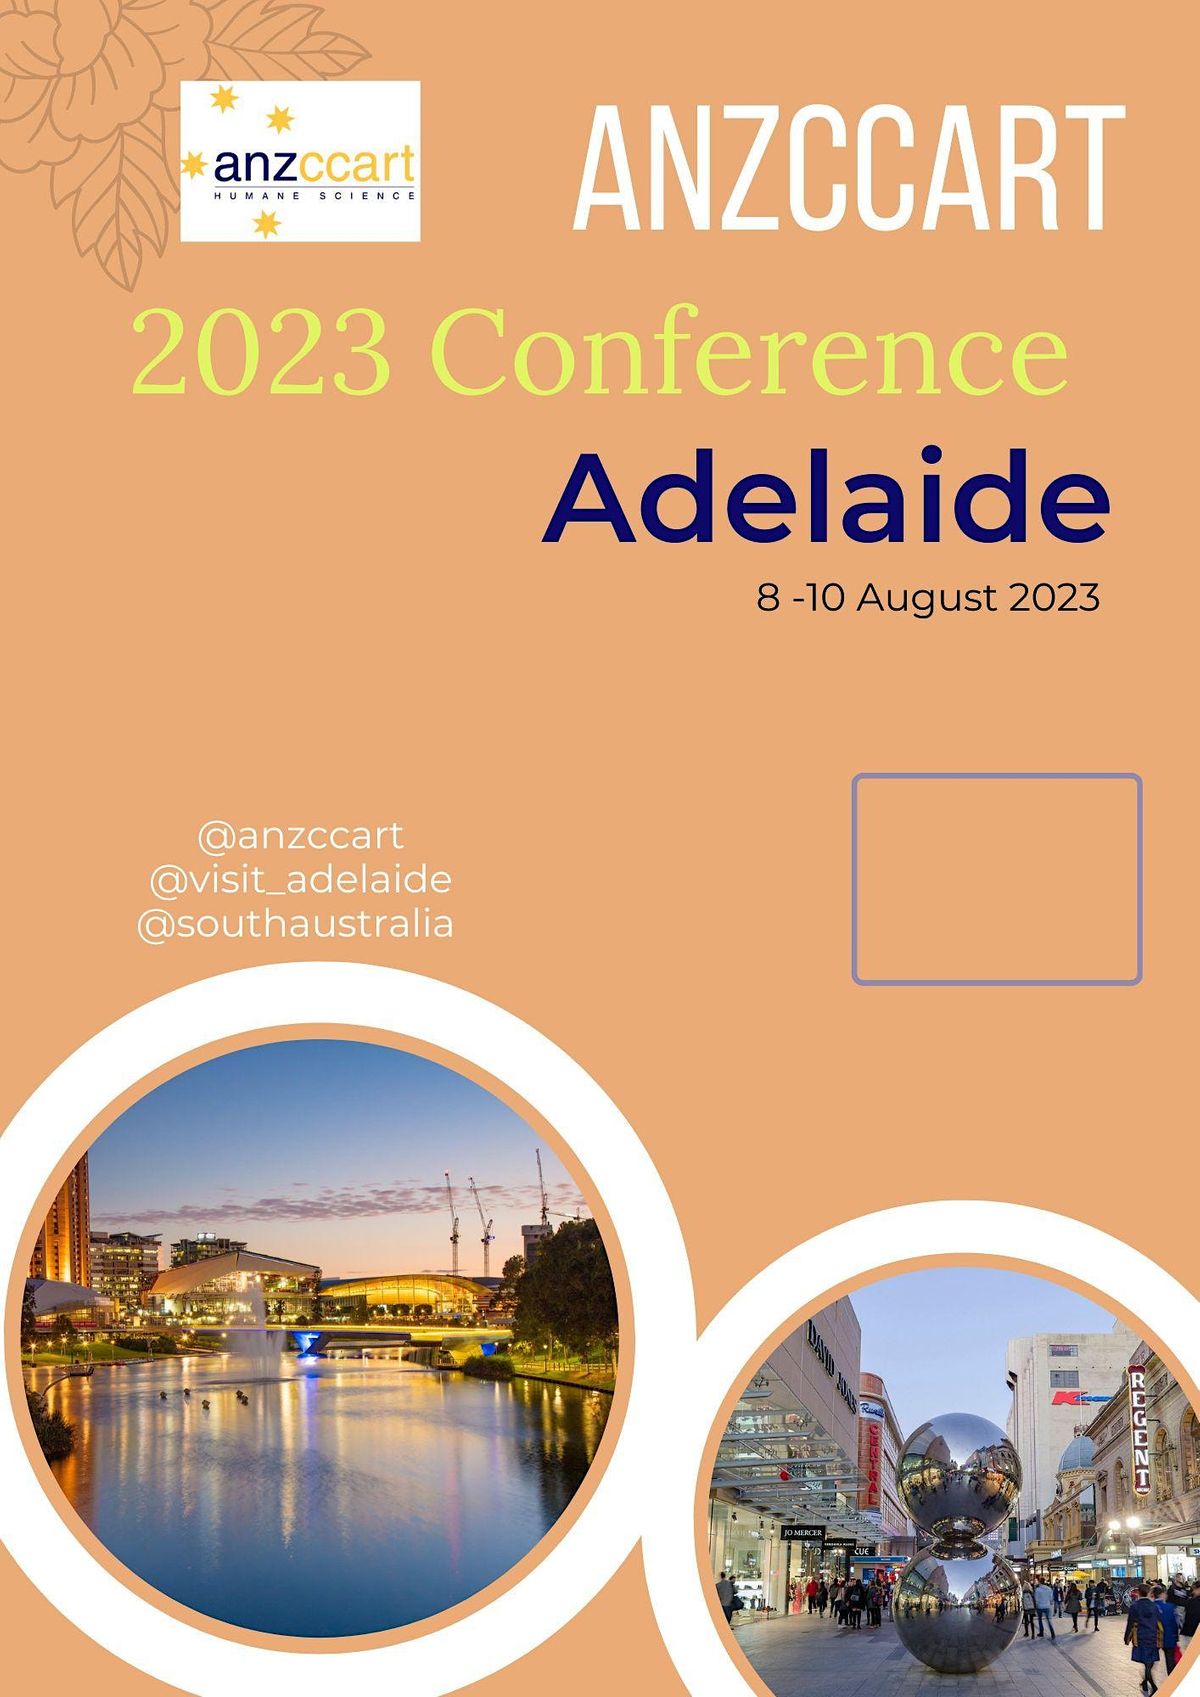 2023 ANZCCART Conference